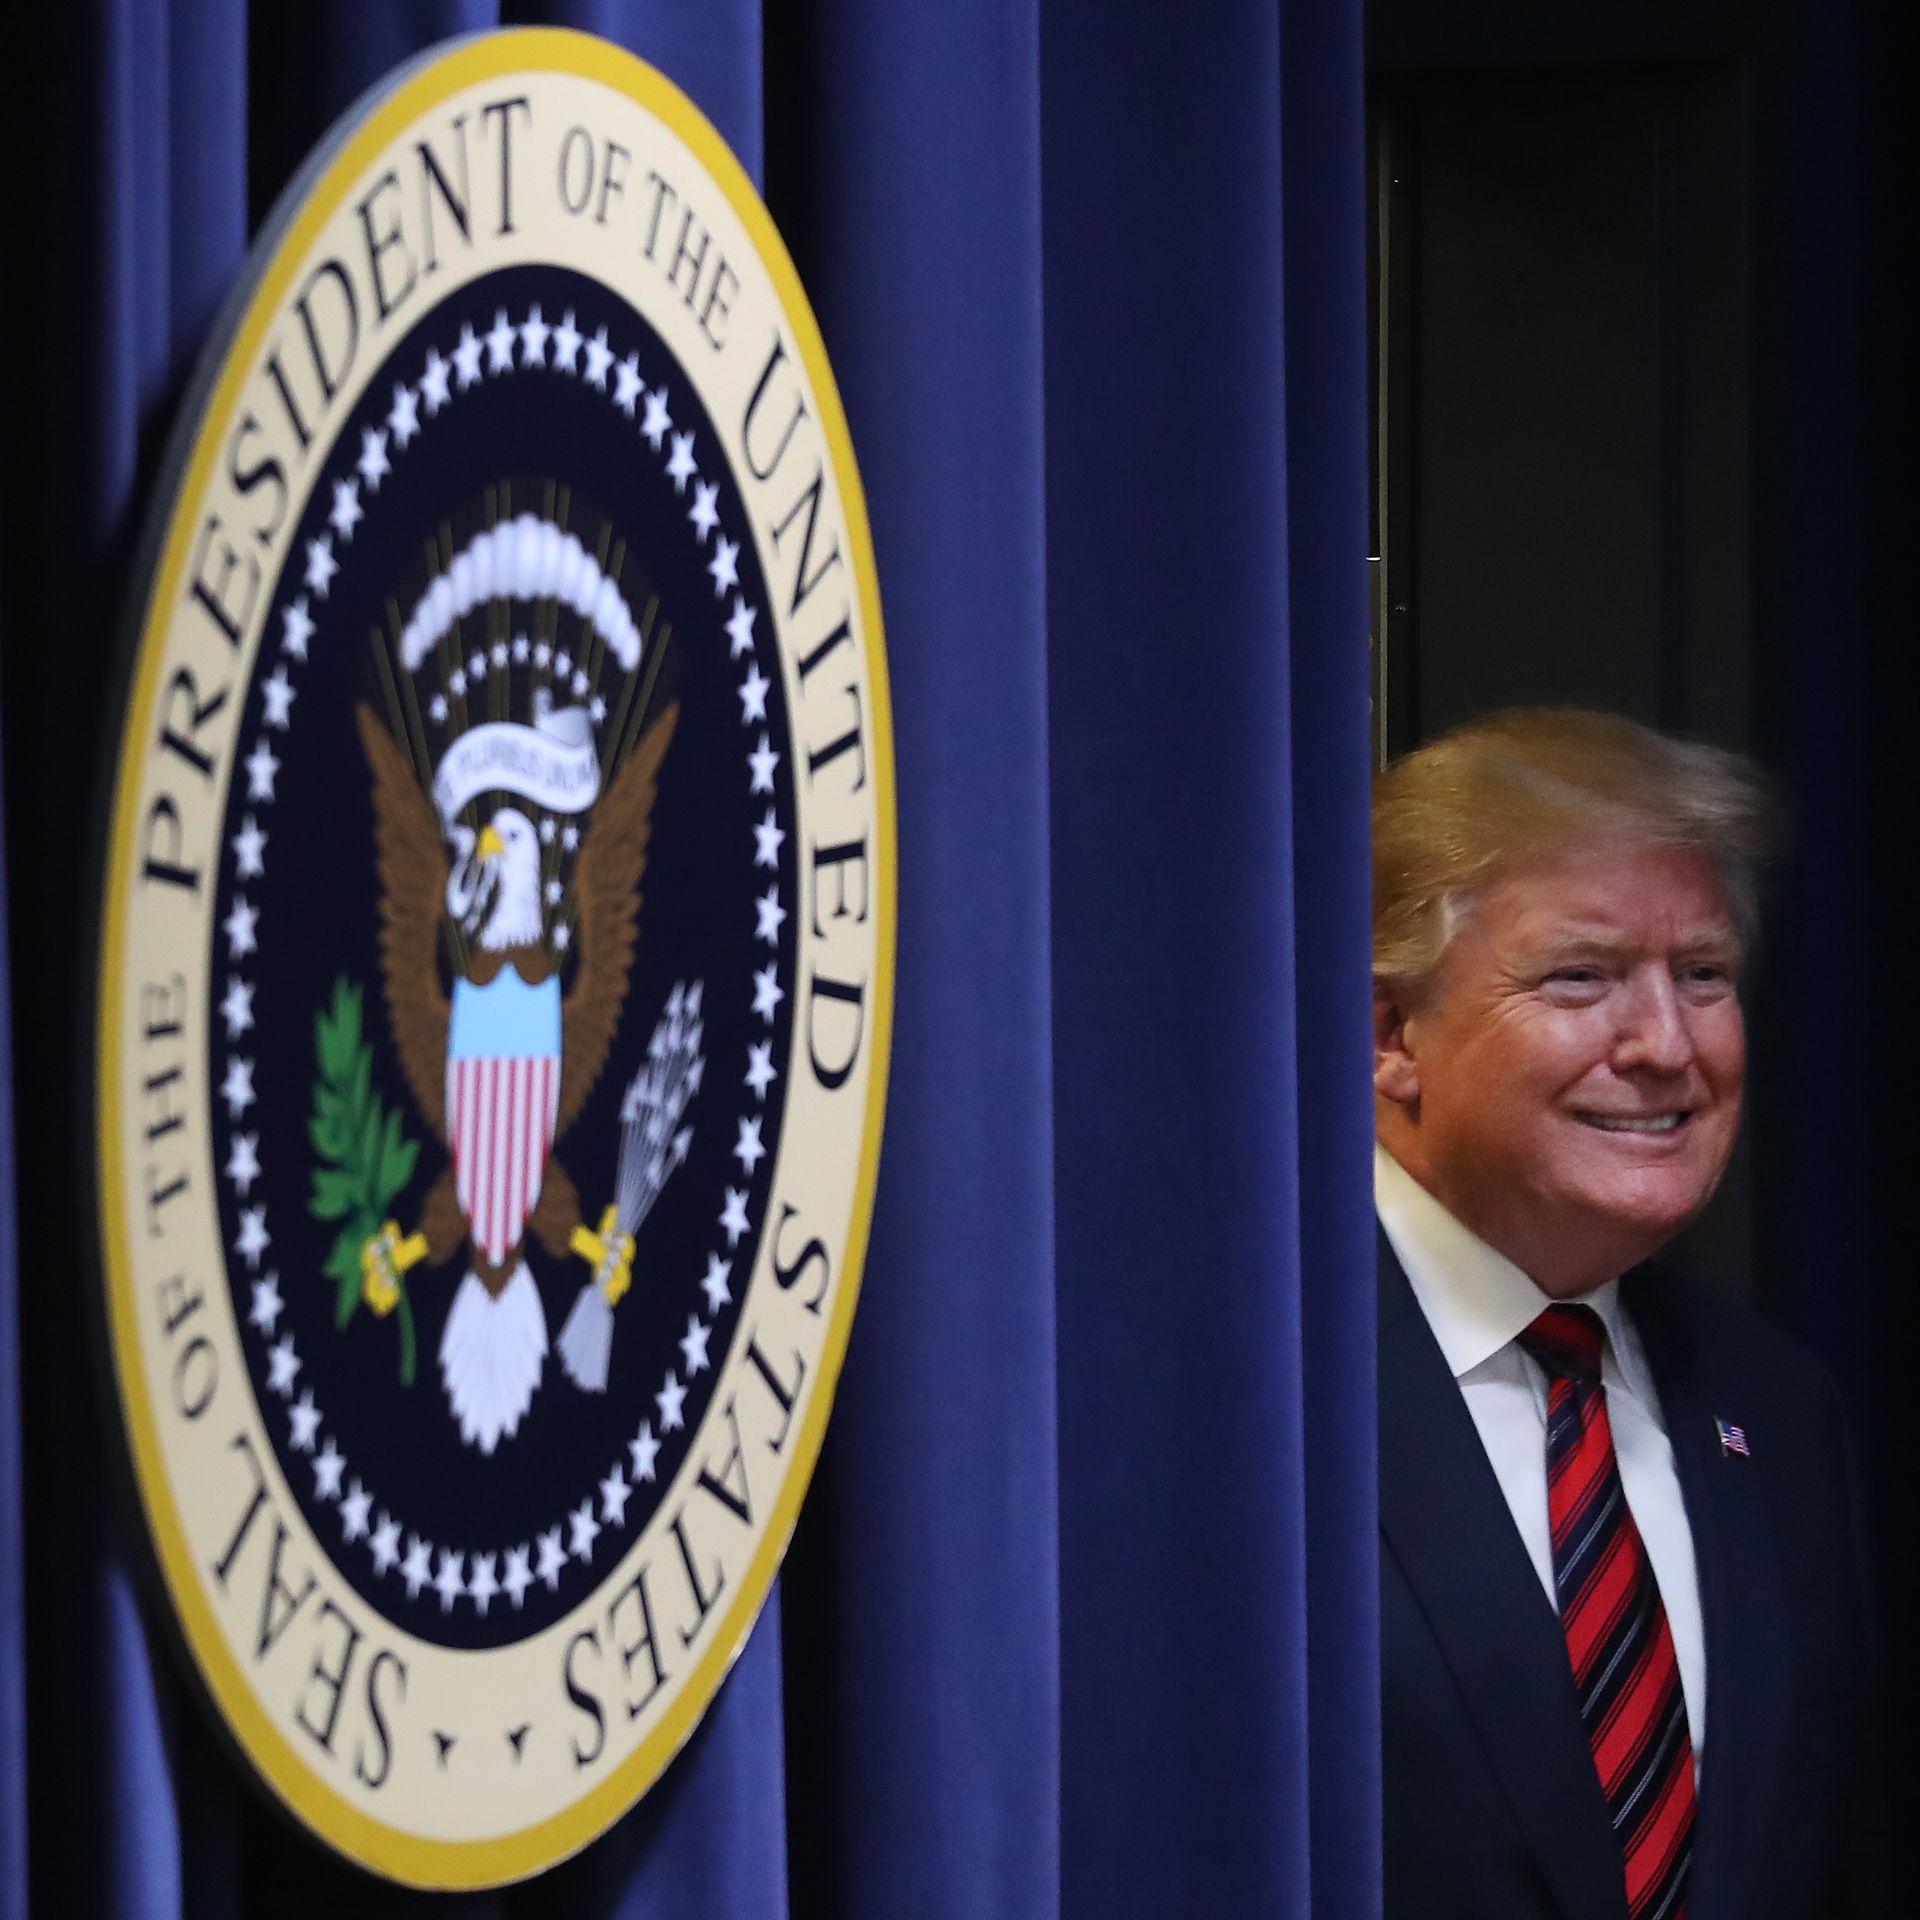 In this image, Trump smiles next to a heavy blue curtain next to the presidential seal. 